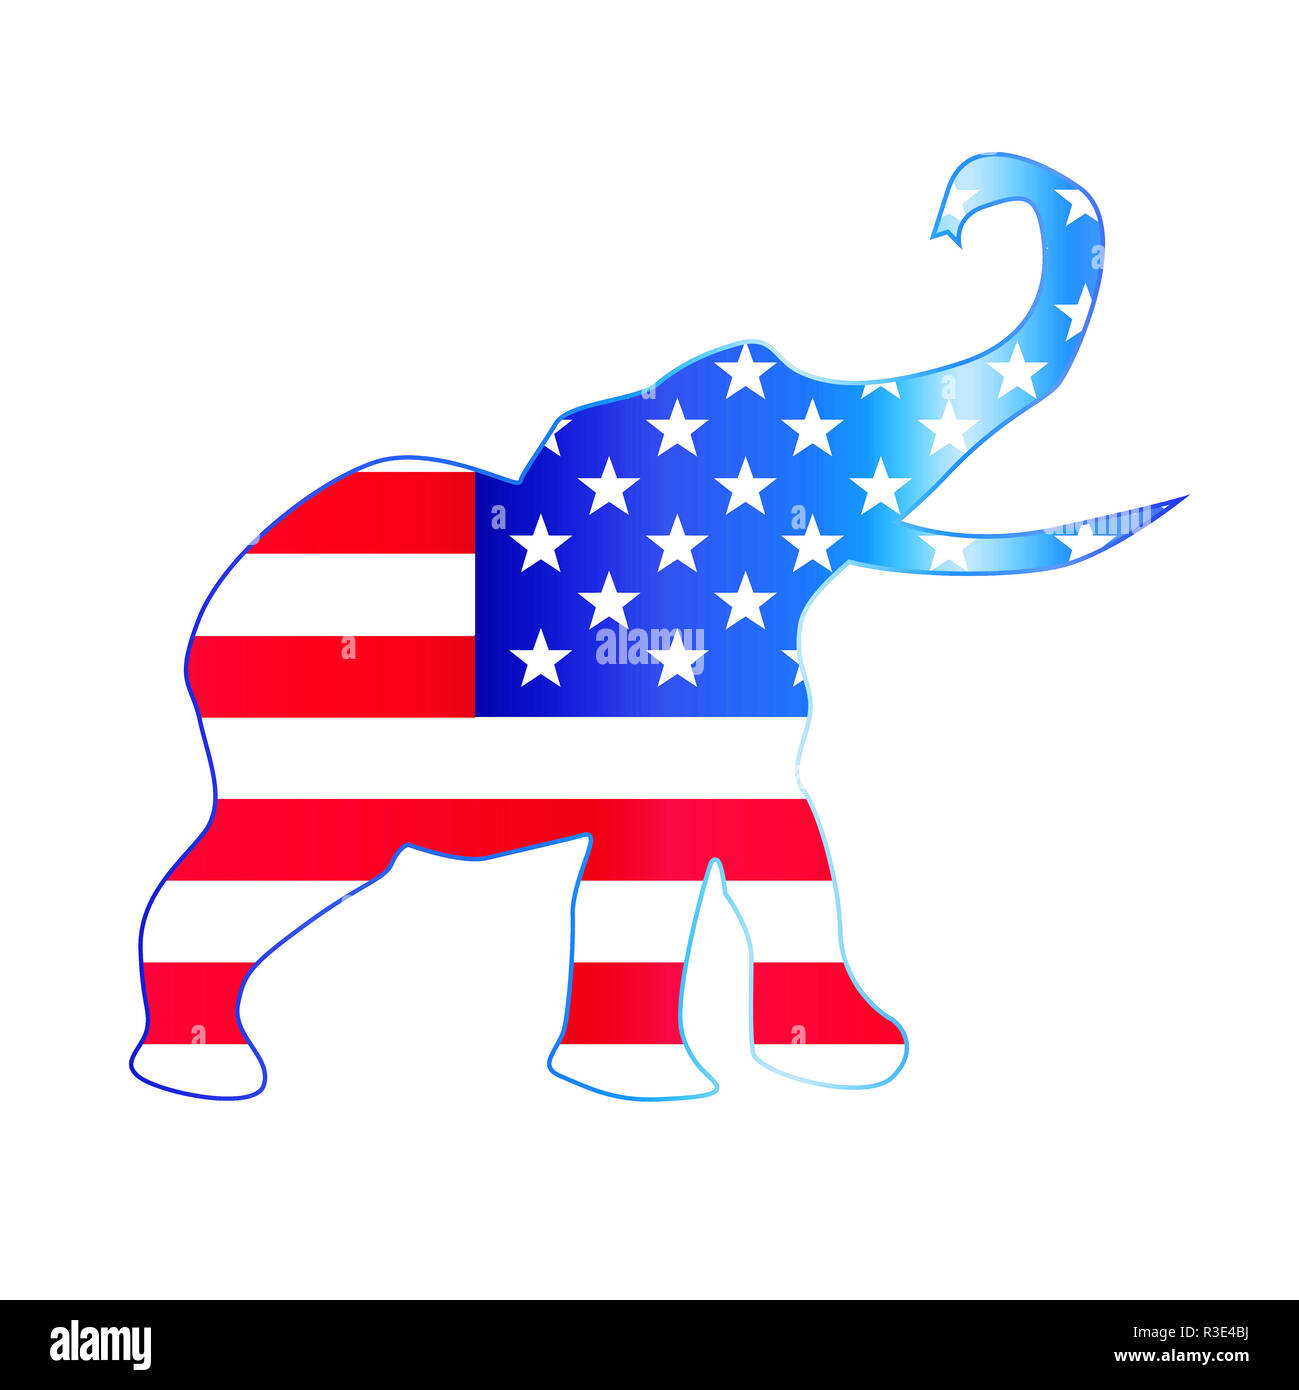 The United States Of American Republican Party Elephant Flag Over A White Background Stock Photo